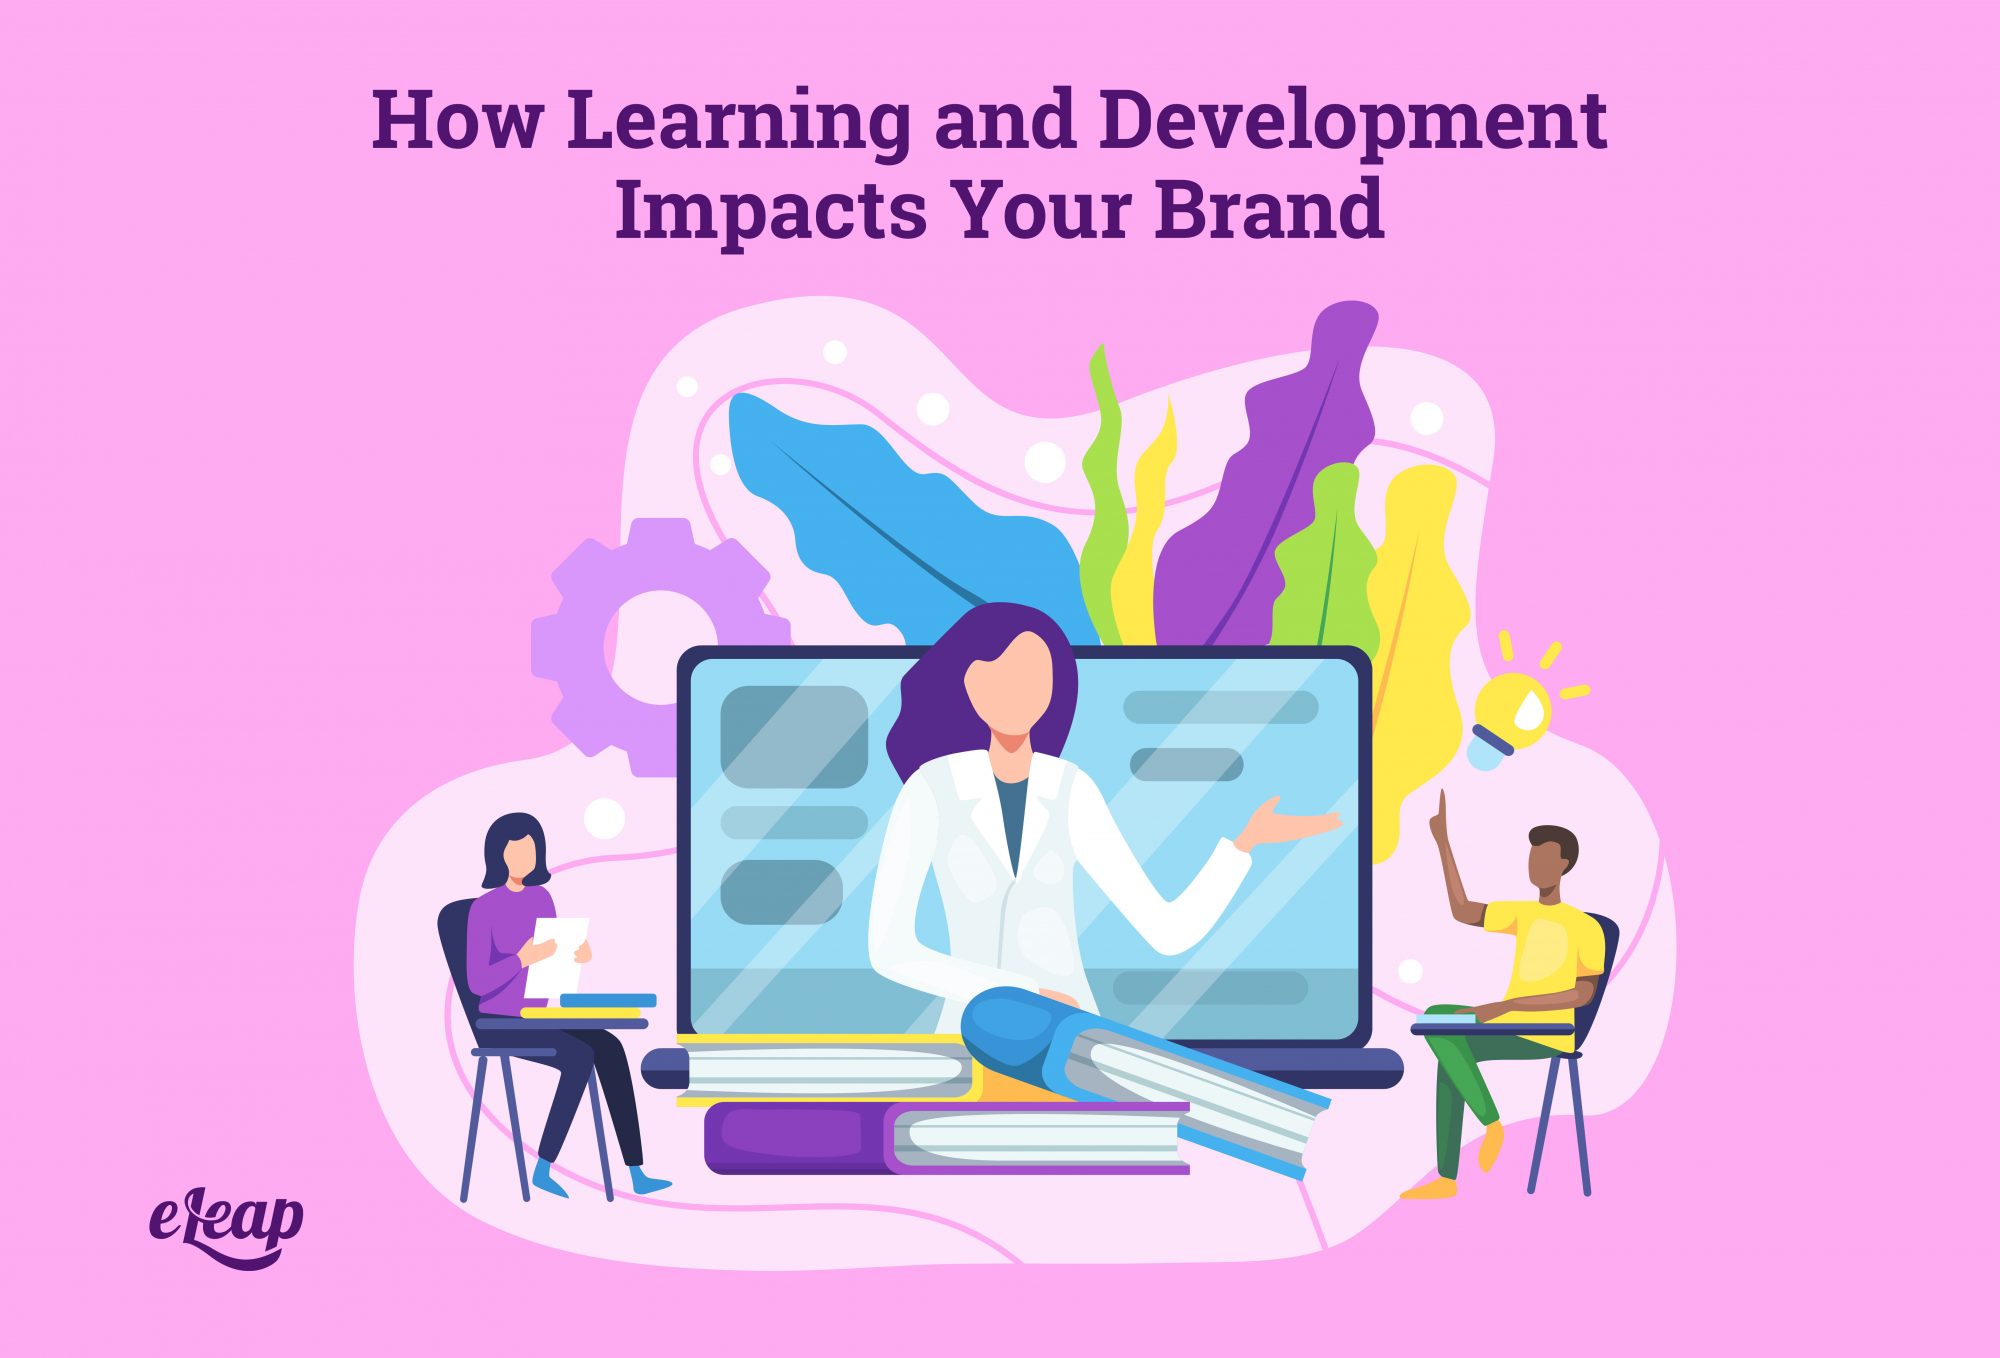 How Learning and Development Impacts Your Brand